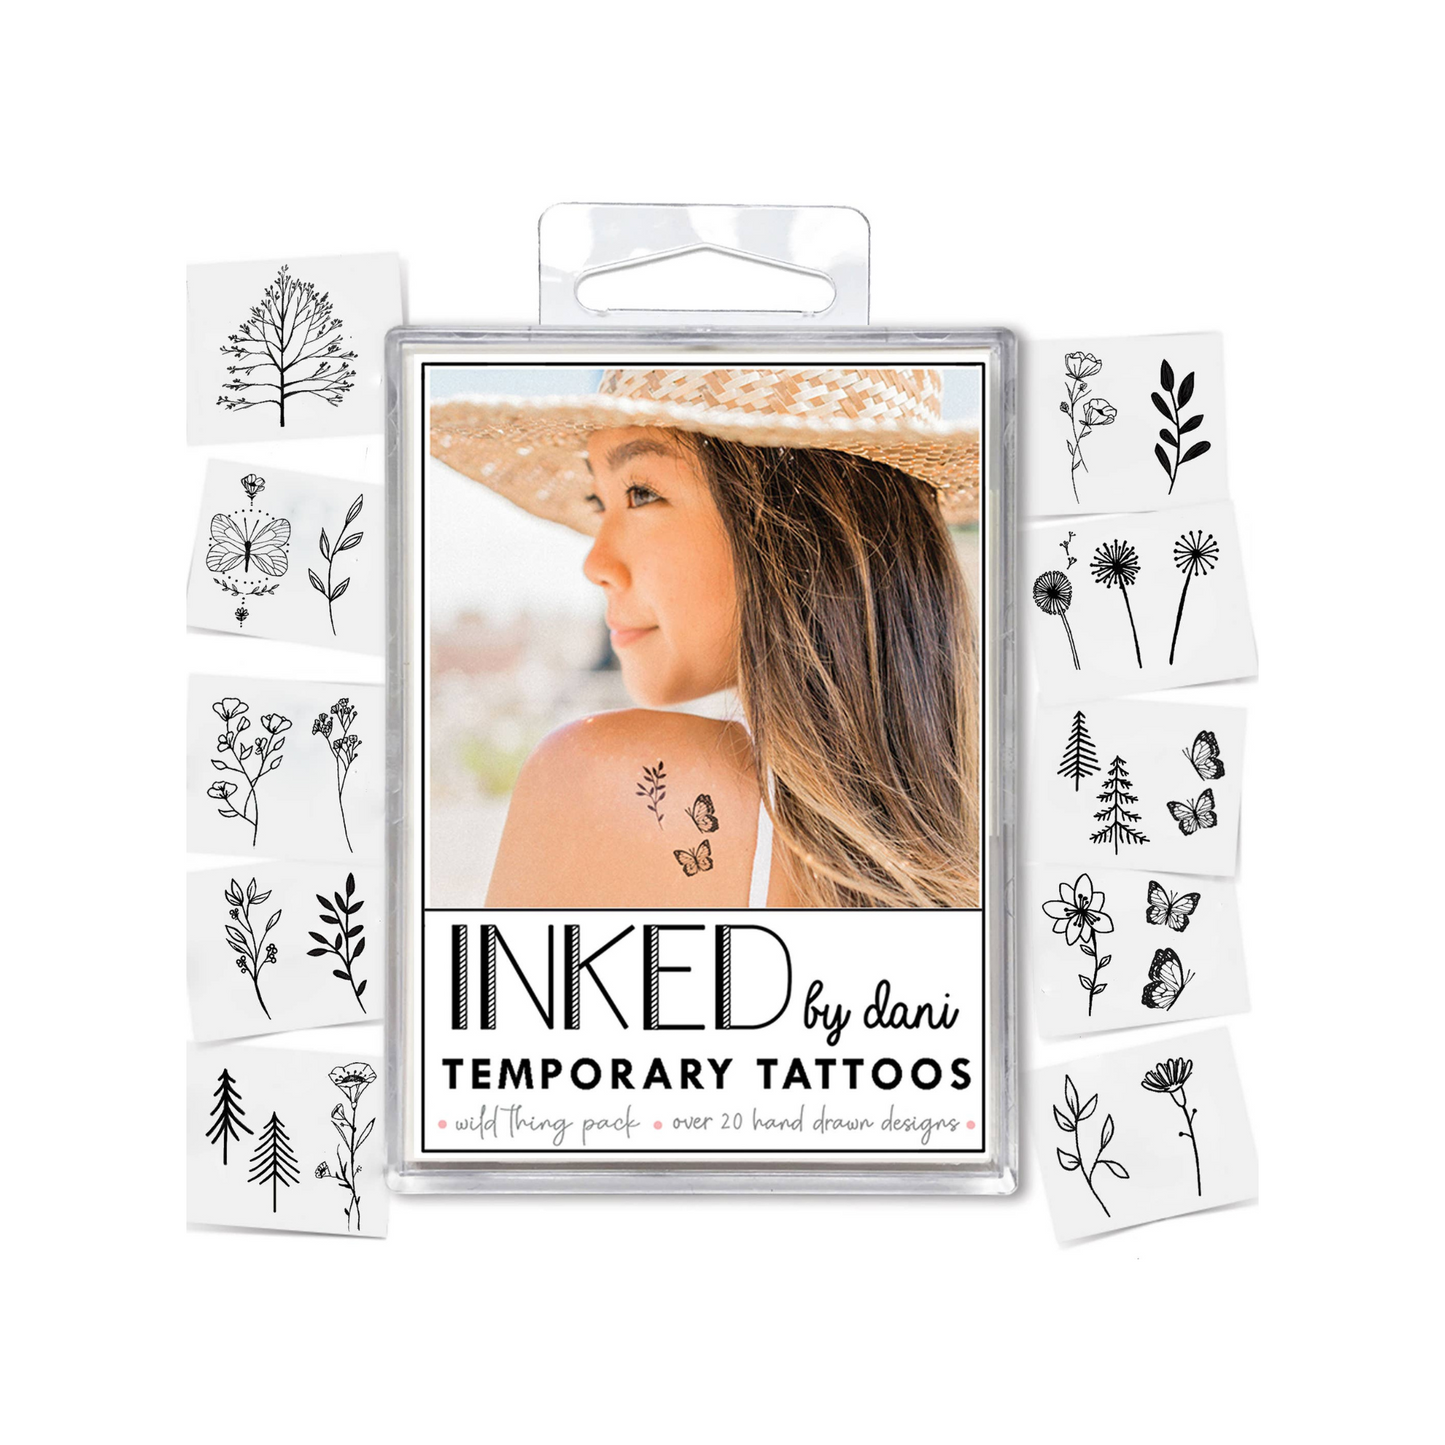 inked by dani wild thing pack of temporary tattoos with varied floral designs